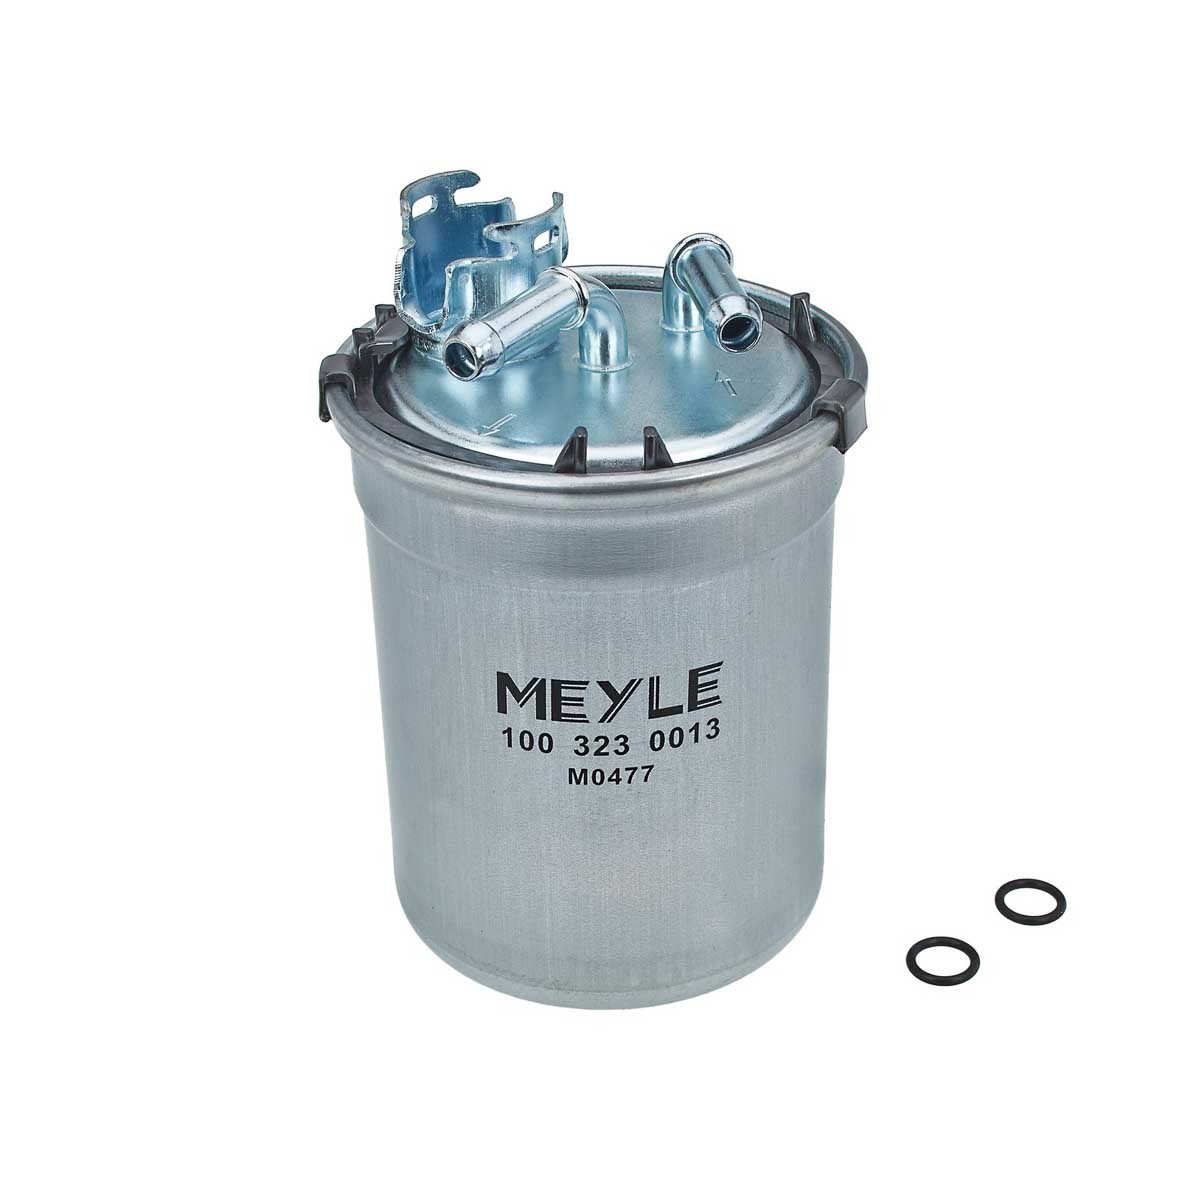 MFF0061 MEYLE In-Line Filter, ORIGINAL Quality, with gaskets/seals Height: 134mm Inline fuel filter 100 323 0013 buy